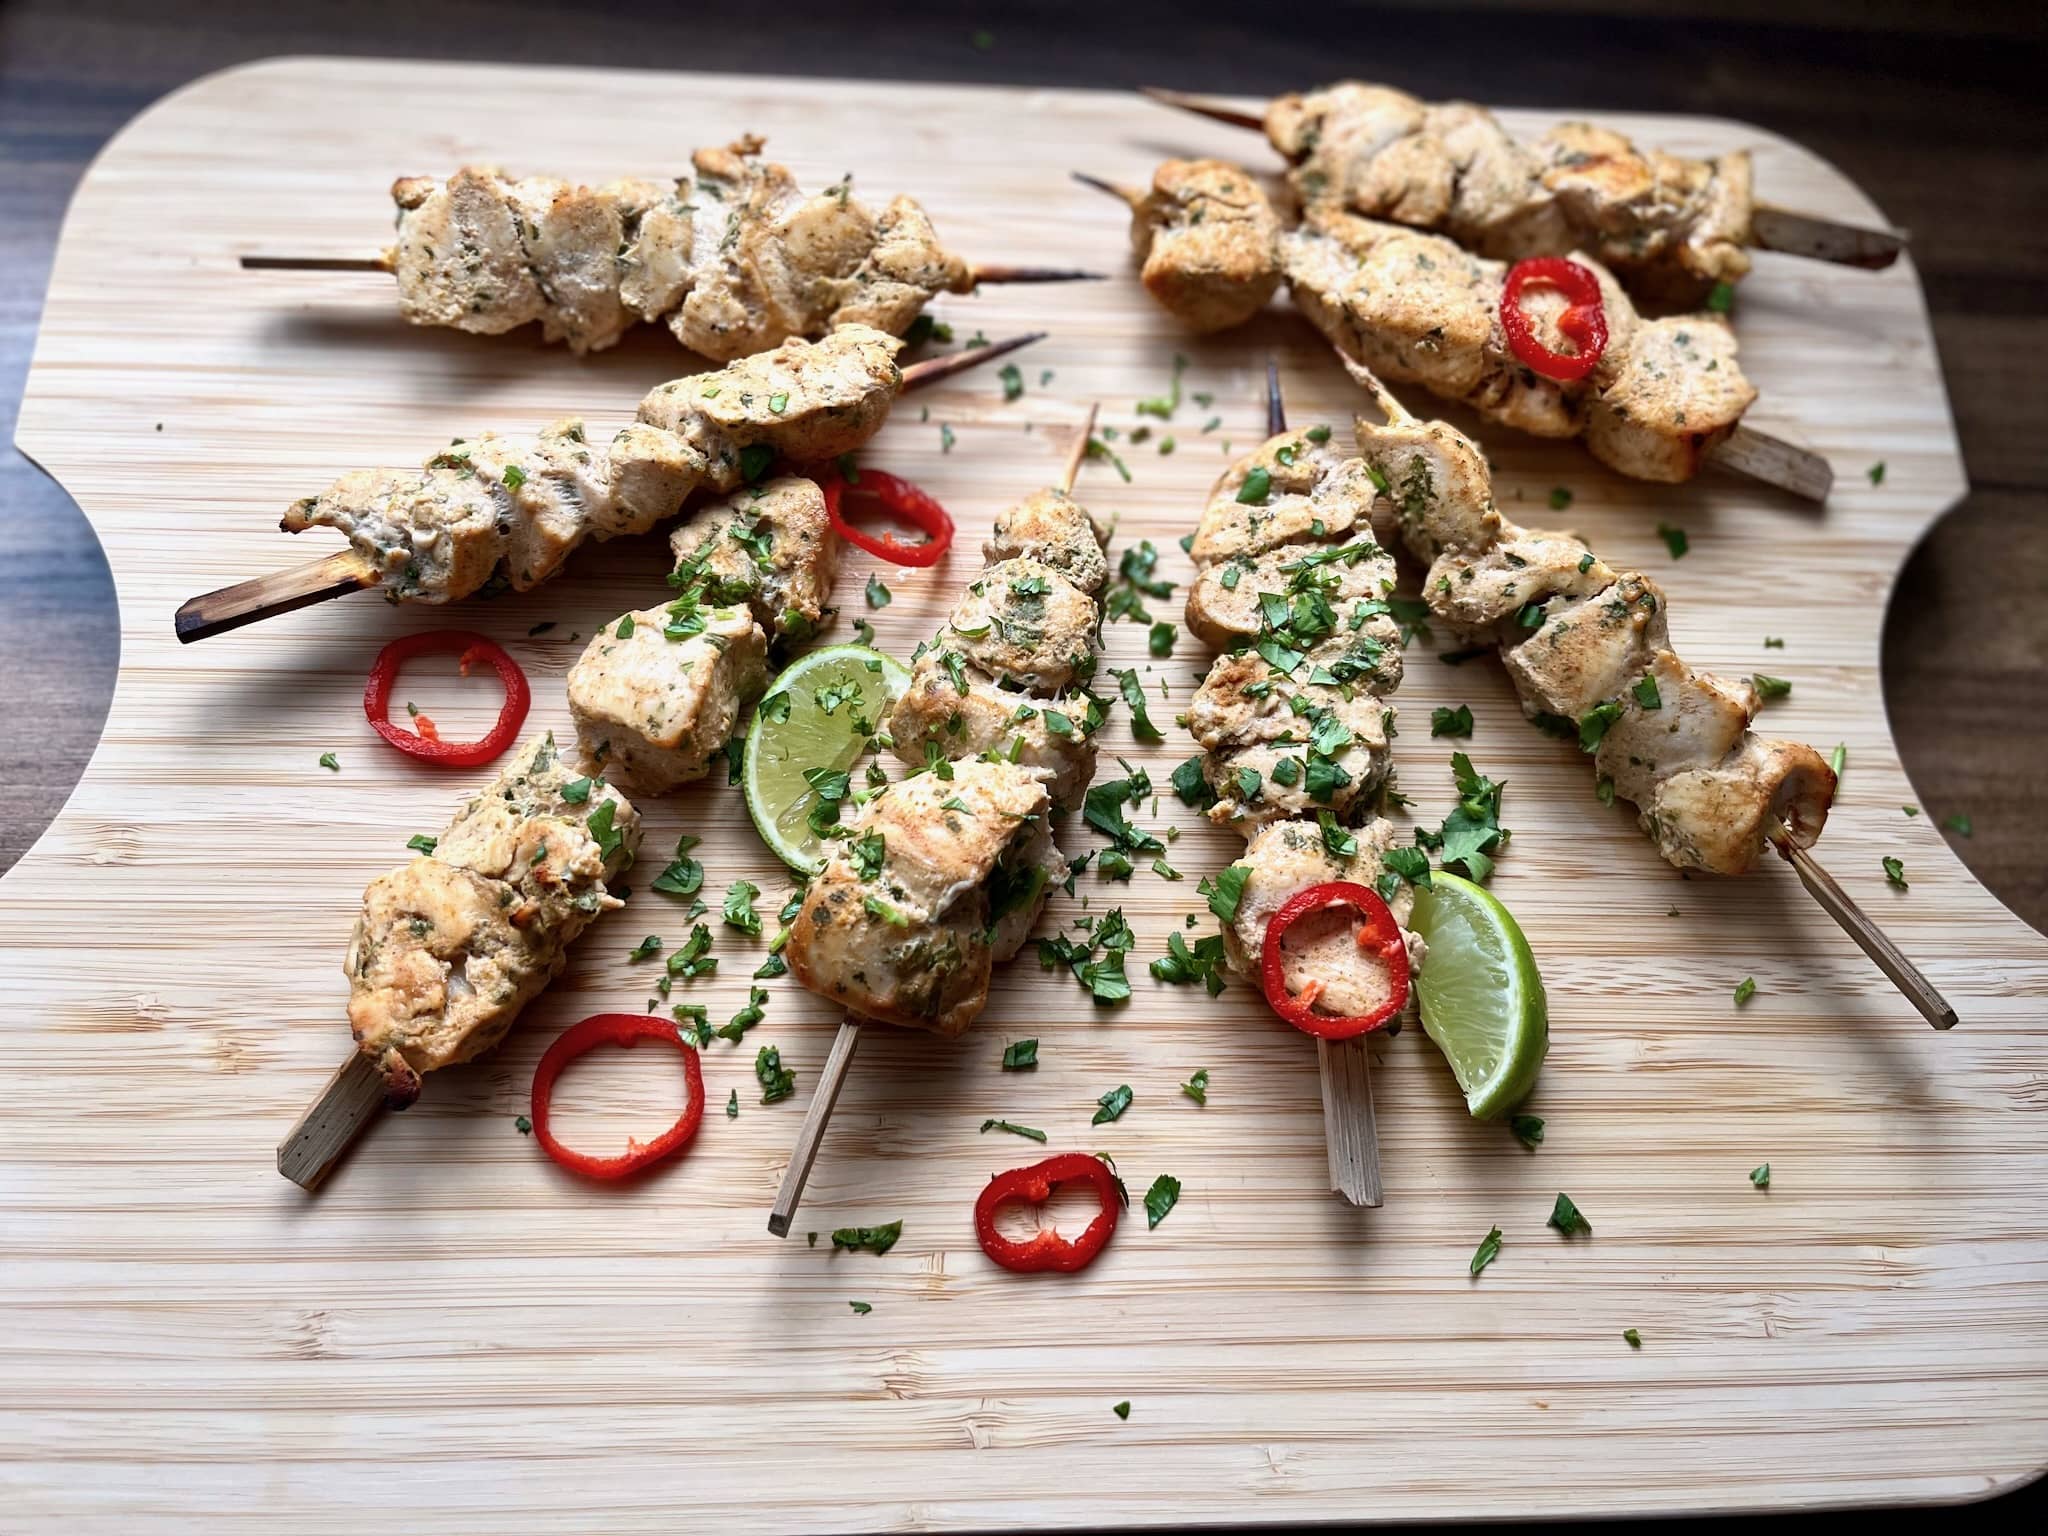 Juicy baked chicken tikka skewers, garnished with fresh coriander, red chilli pepper, and lime, served on a chopping board